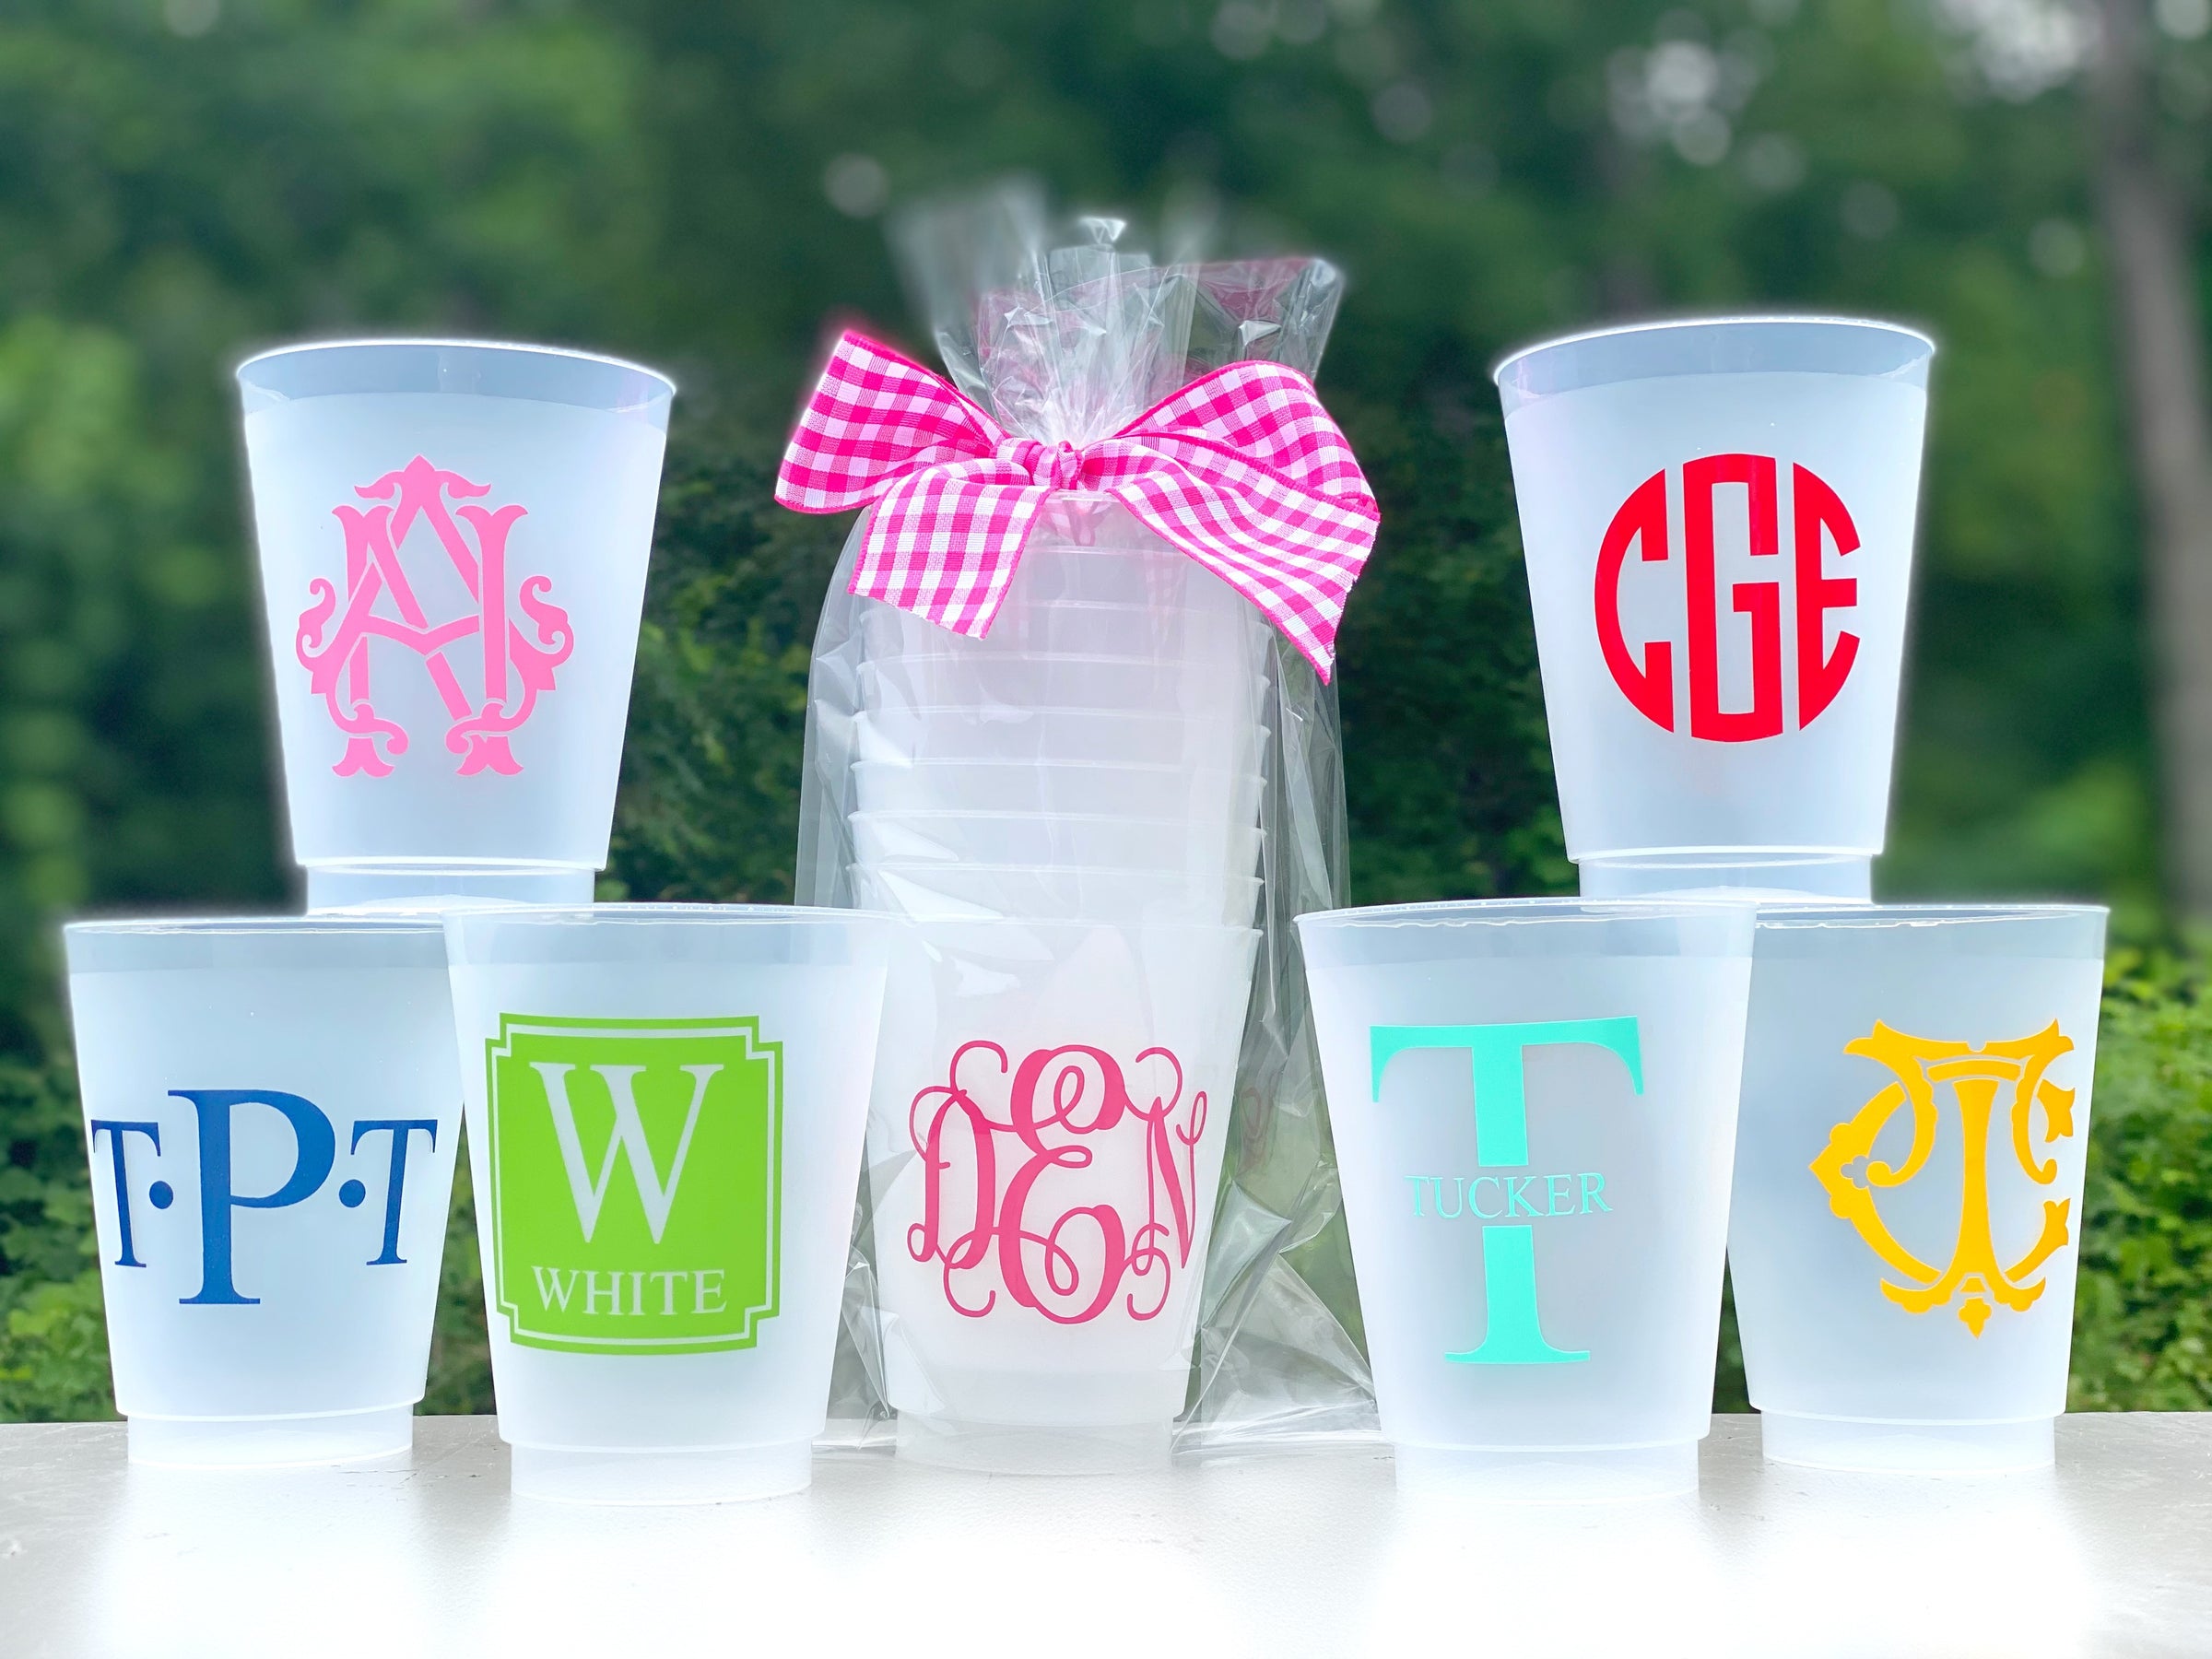 24 oz. Custom Printed Recyclable Plastic Cup